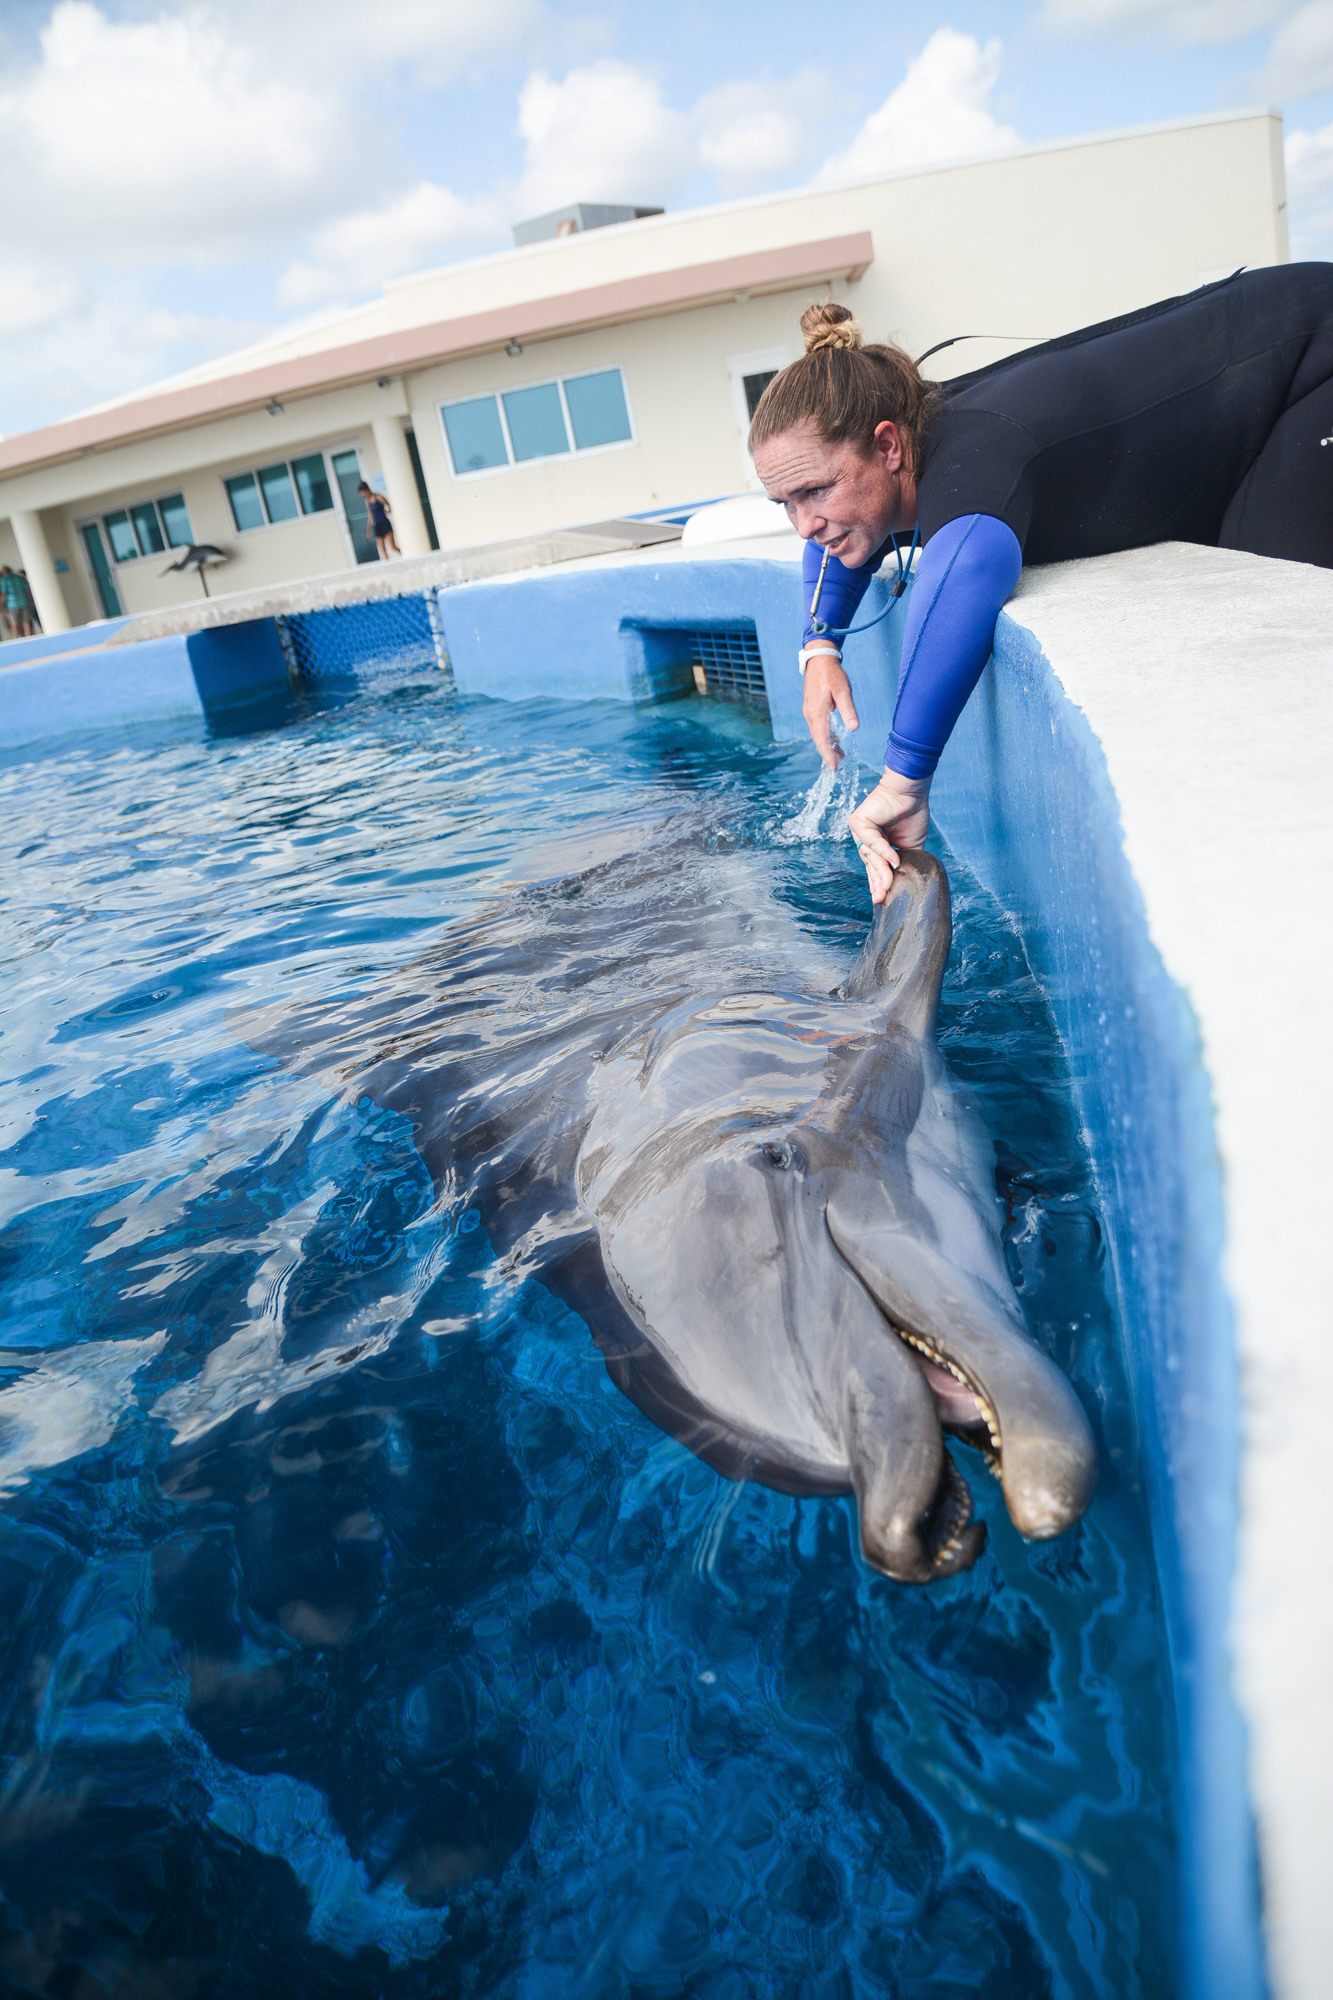 Julie Wendt, associate curator of animal training, inspects Zac's flipper in one of the seven pools at Marineland. Photo by Paige Wilson